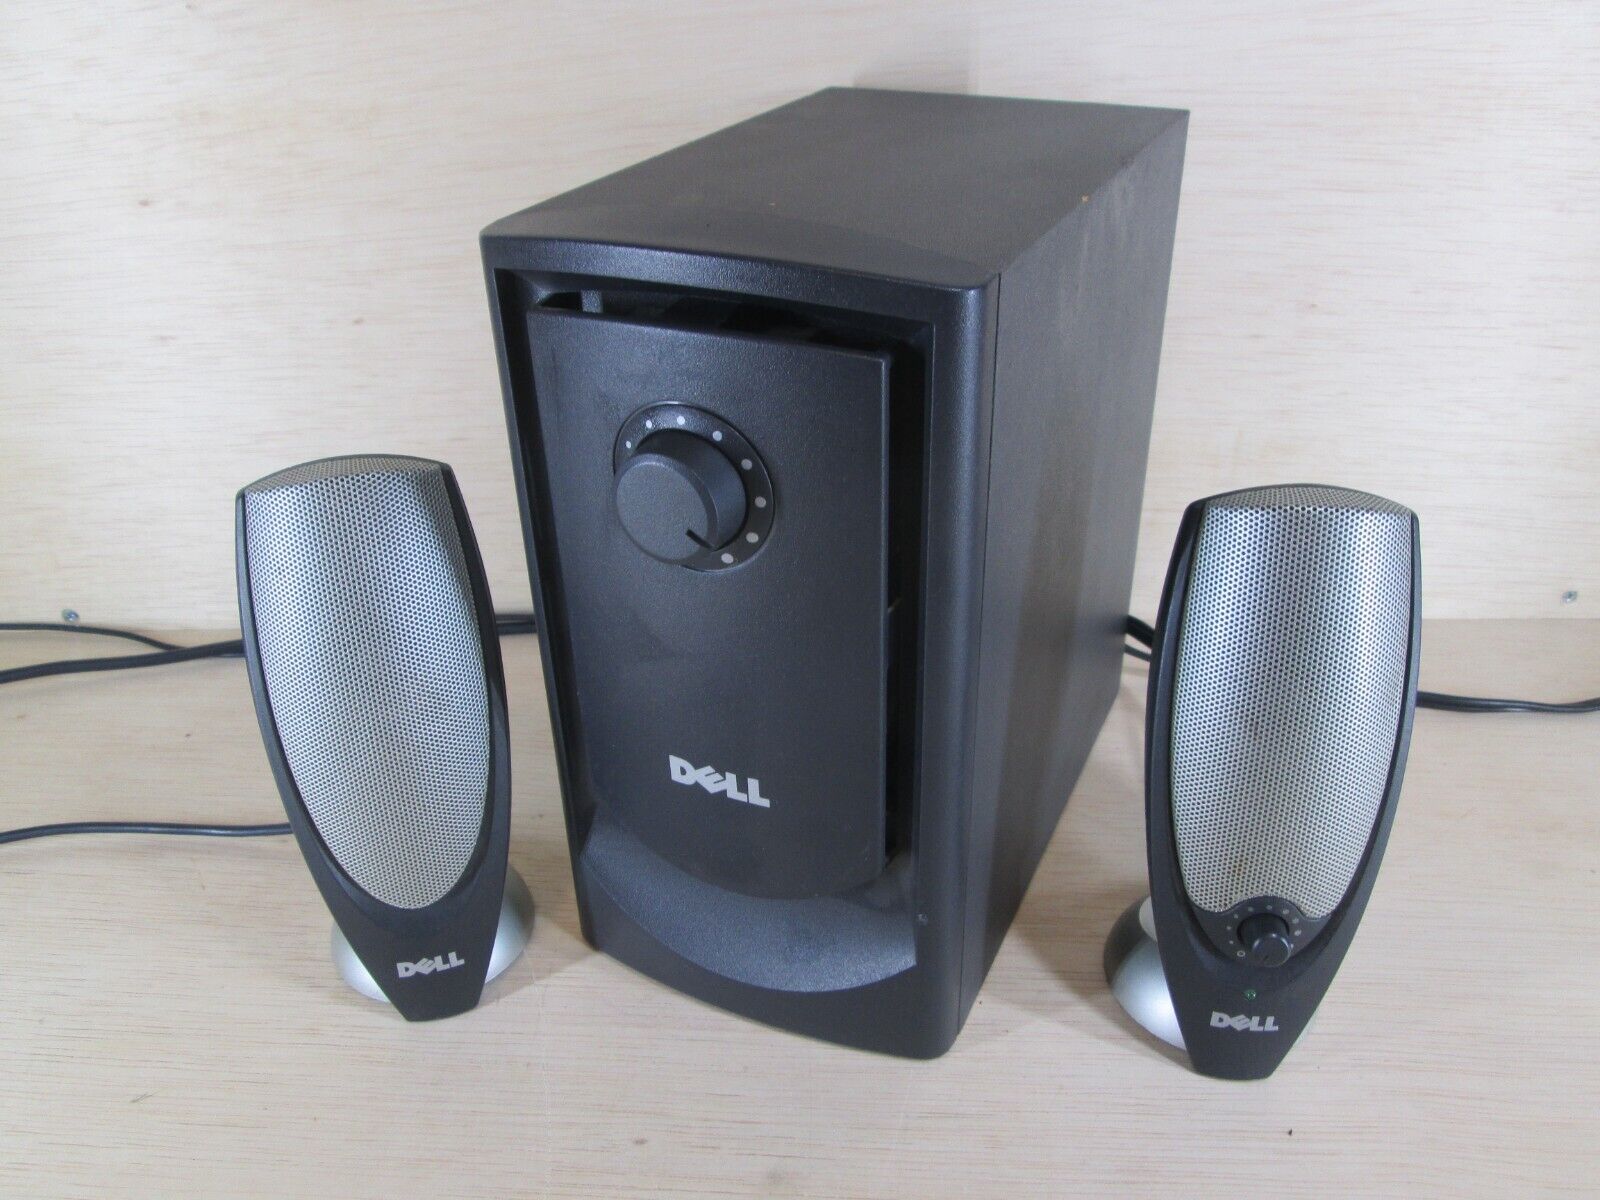 Dell A425 Zylux Multimedia Computer Speaker System with Powered Subwoofer Tested